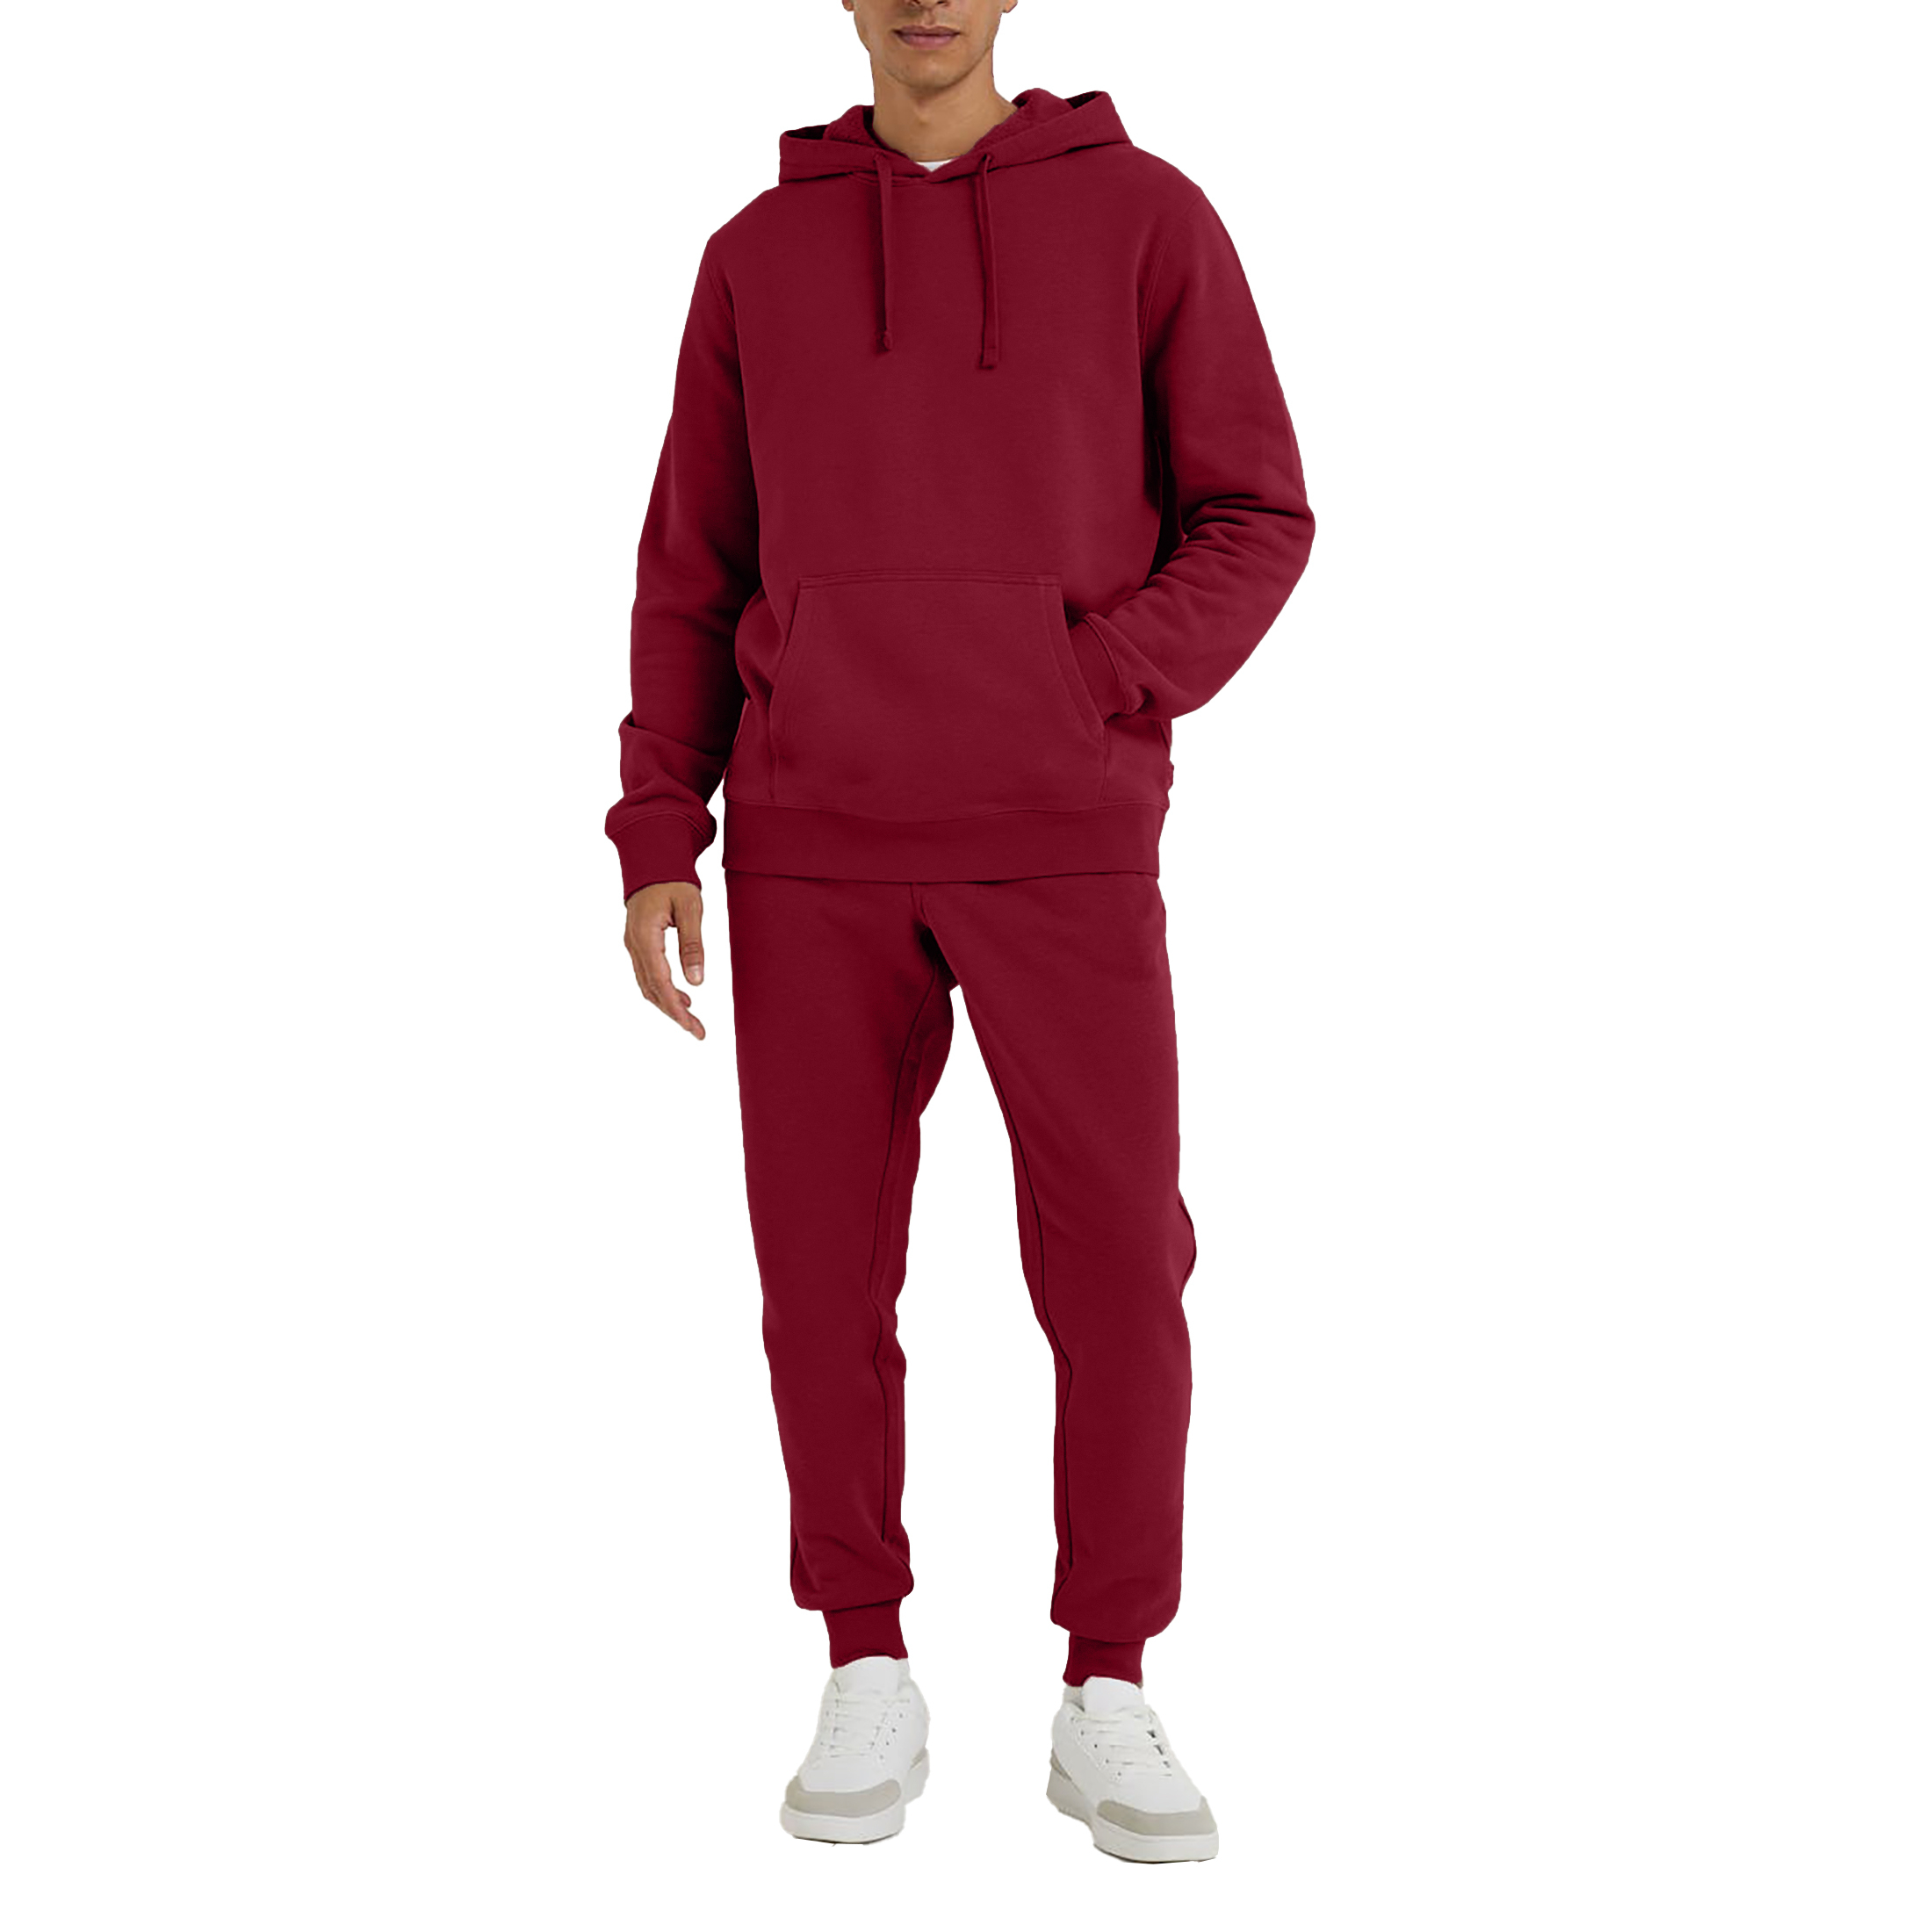 Men's Athletic Warm Jogging Pullover Active Tracksuit - Red, Large